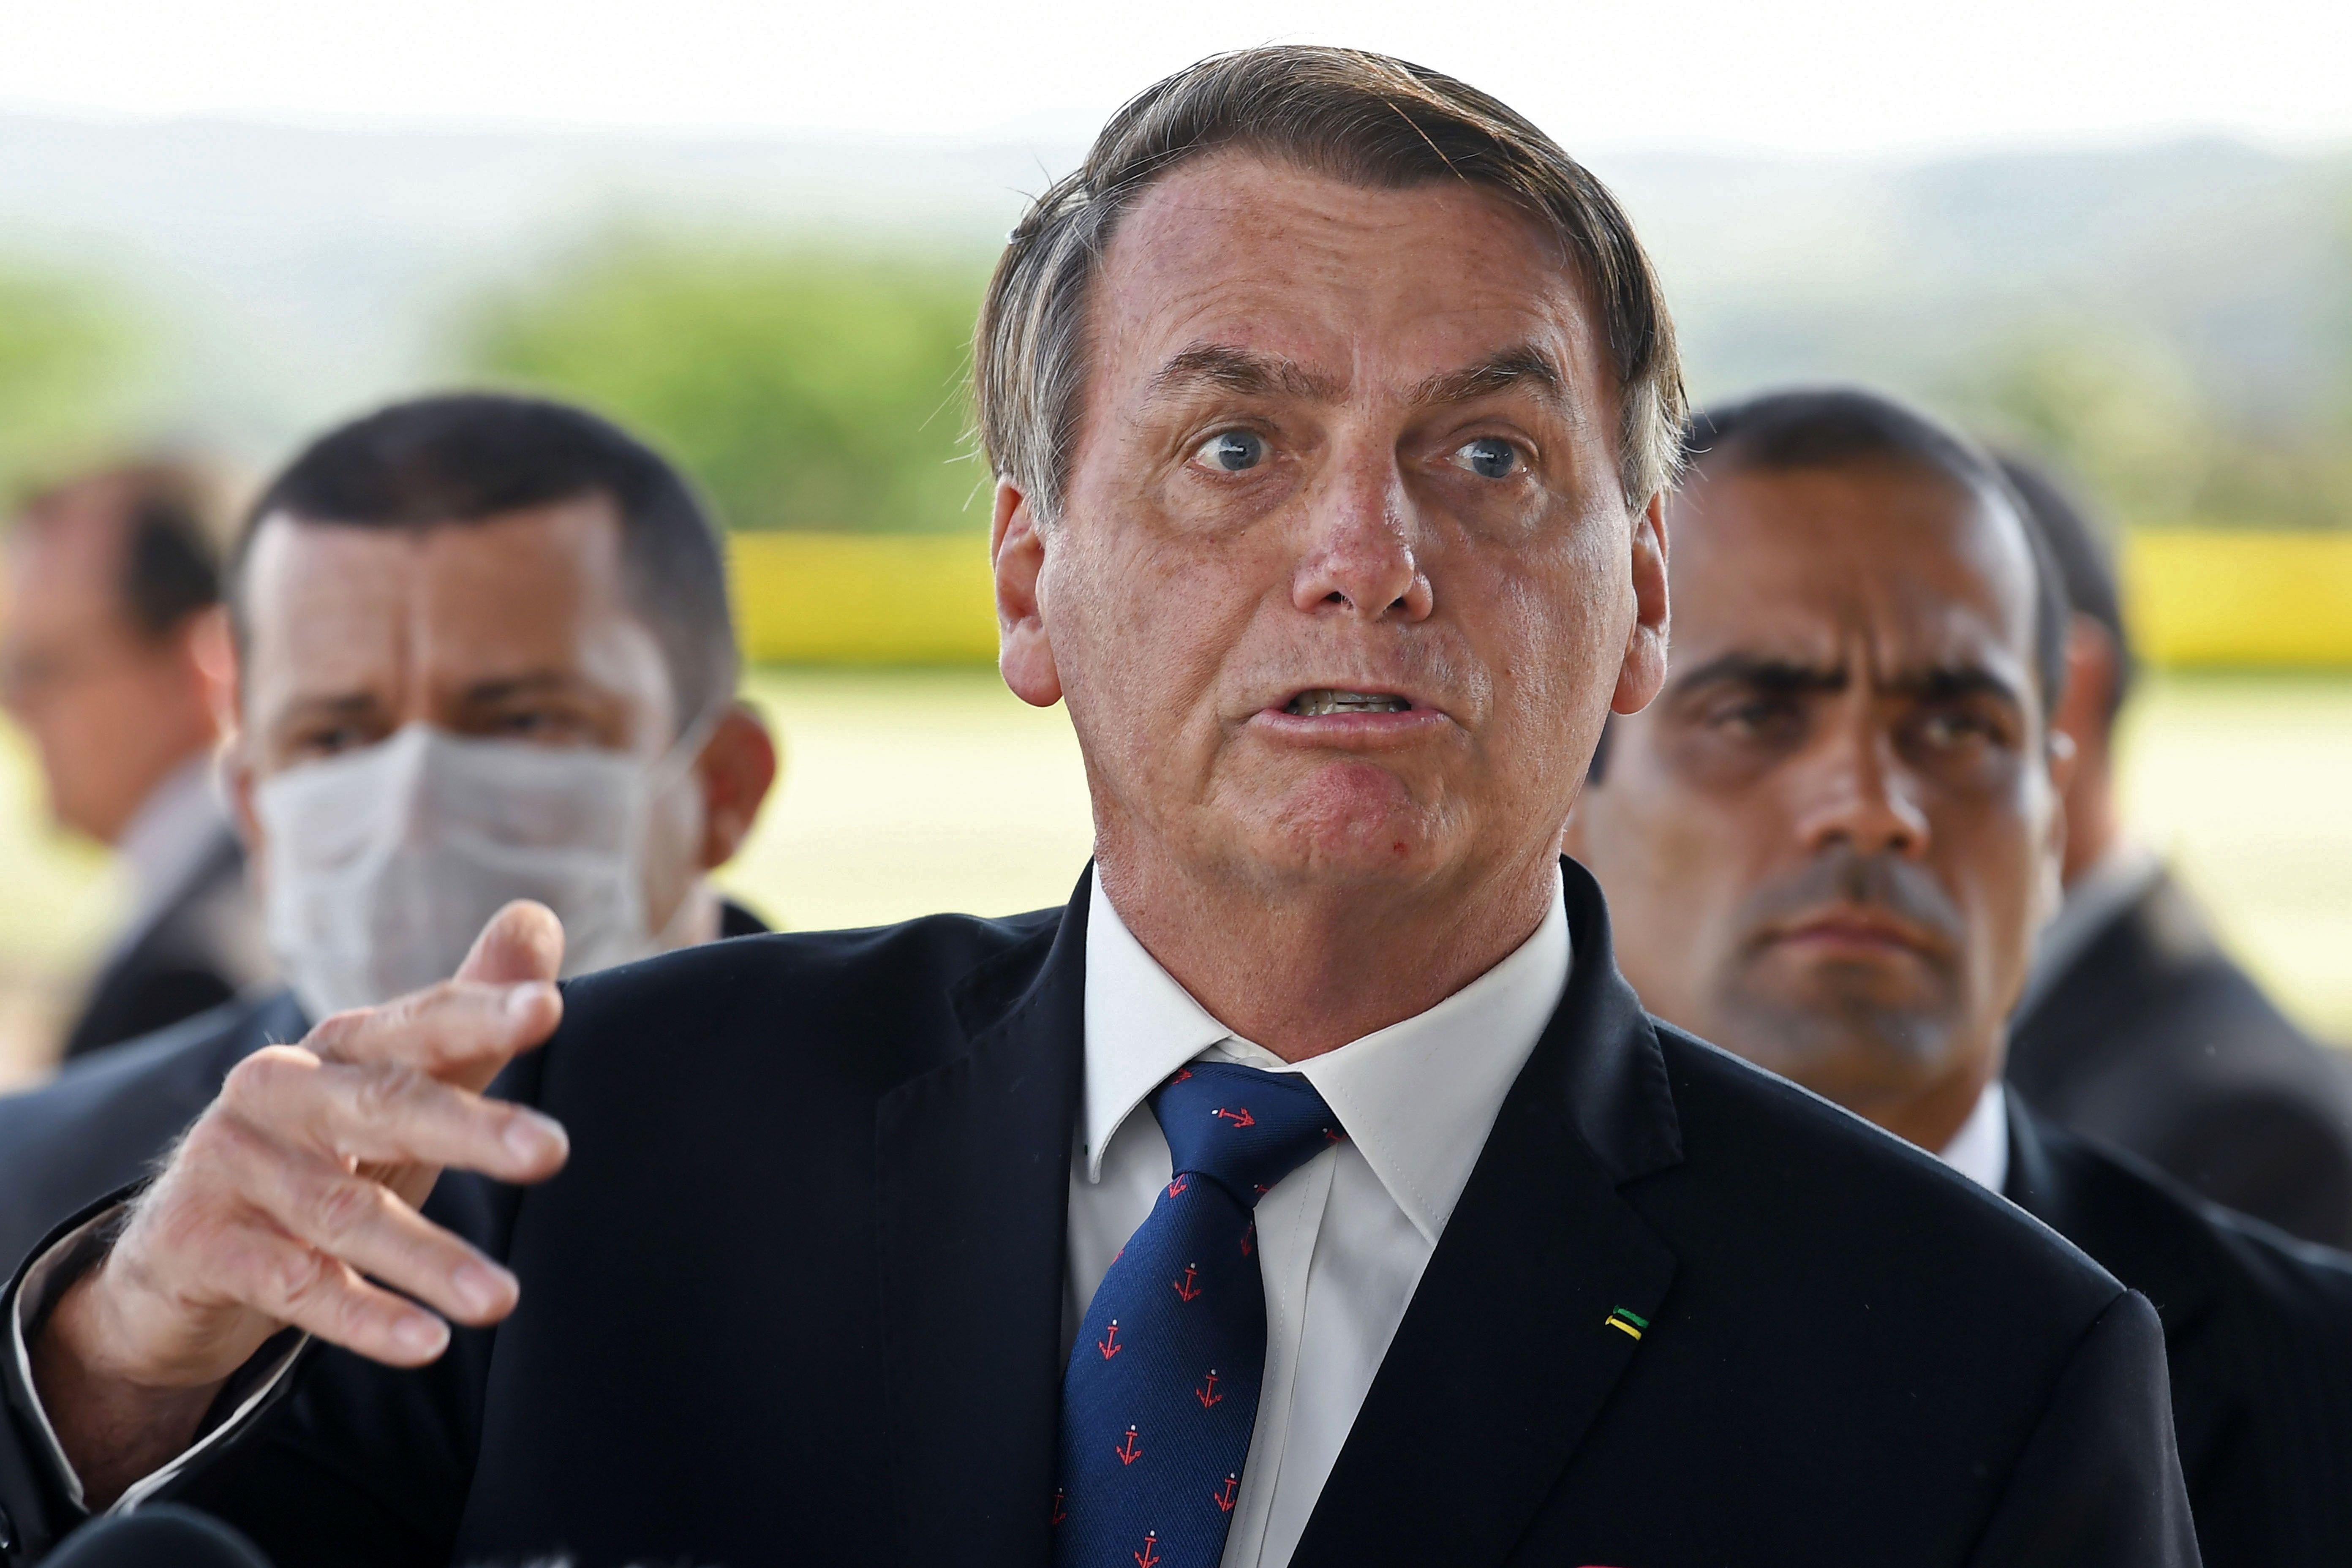 Bolsonaro speaks. An aide behind him wears a surgical mask.